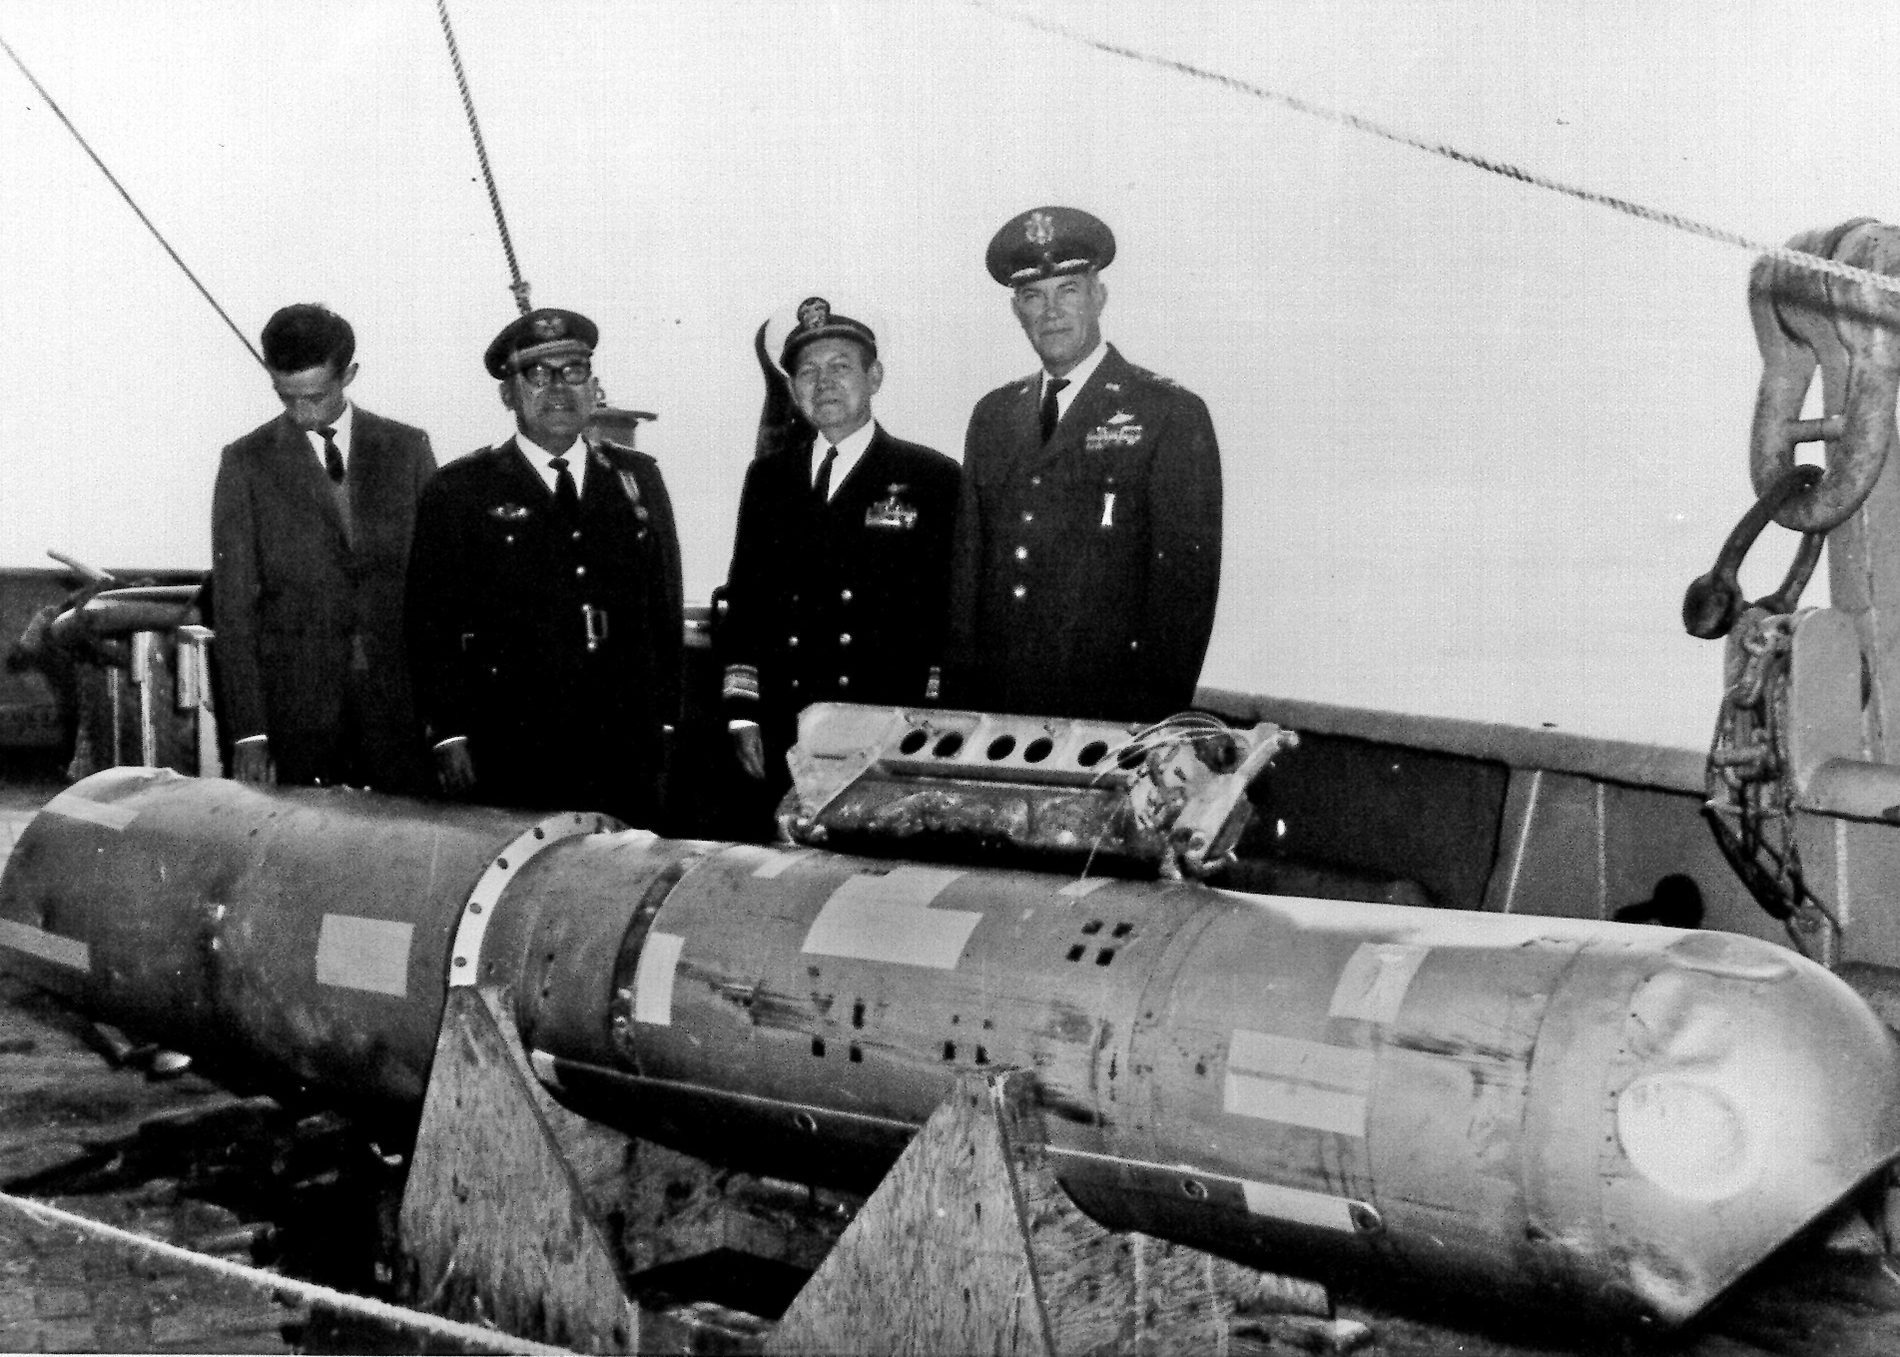 The story of “Little Alvin” and the lost H-bomb – Woods Hole Oceanographic Institution